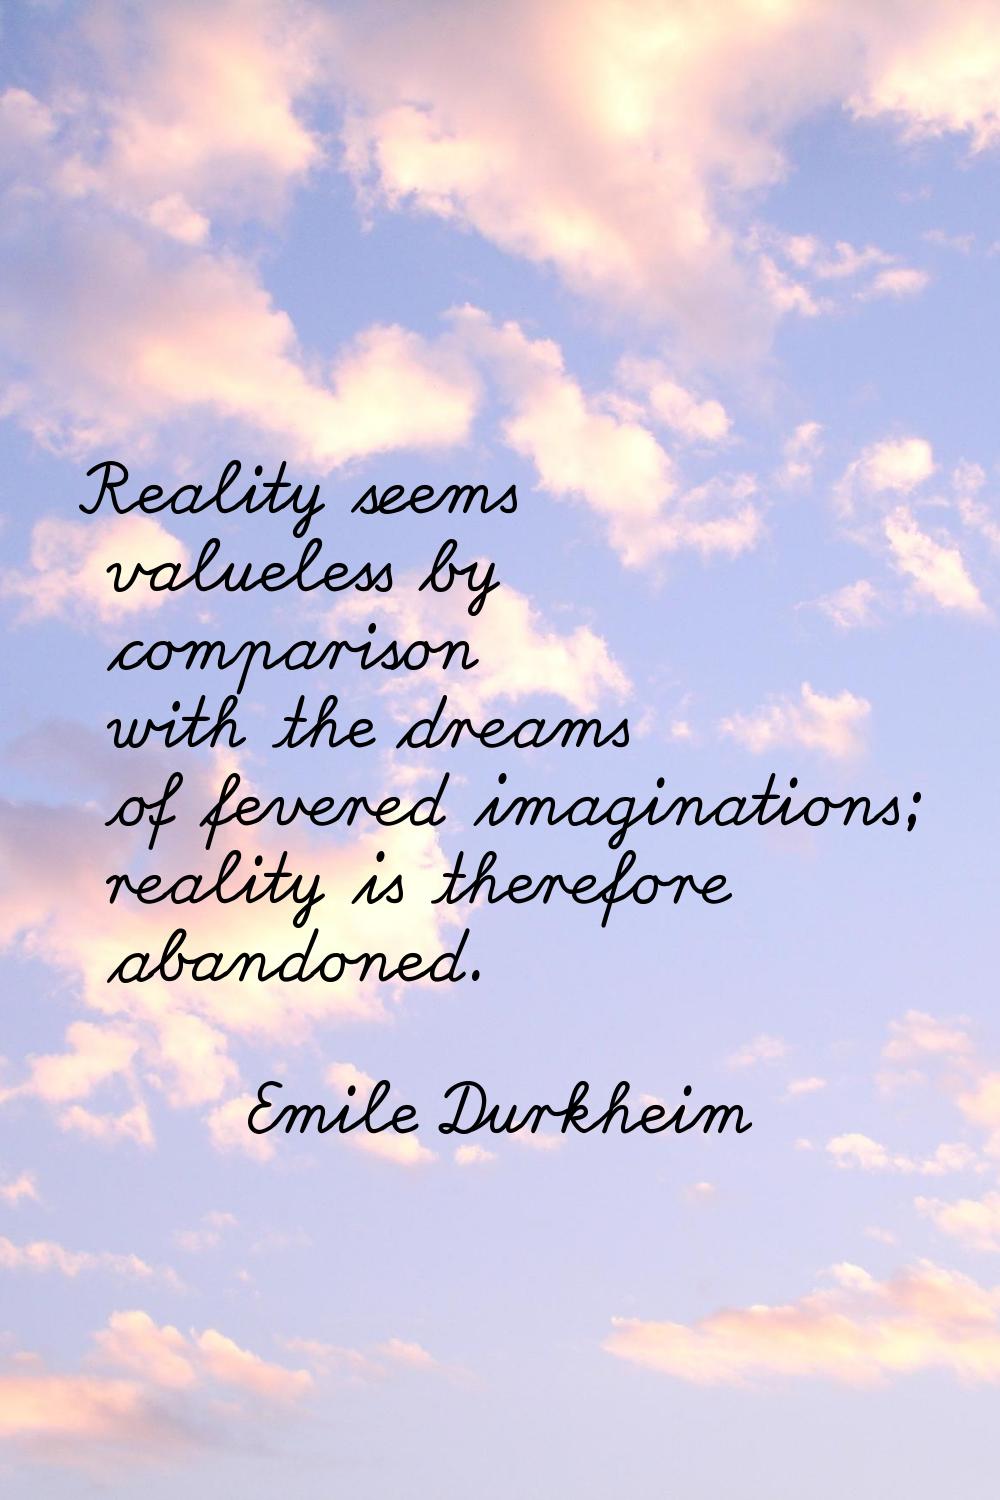 Reality seems valueless by comparison with the dreams of fevered imaginations; reality is therefore